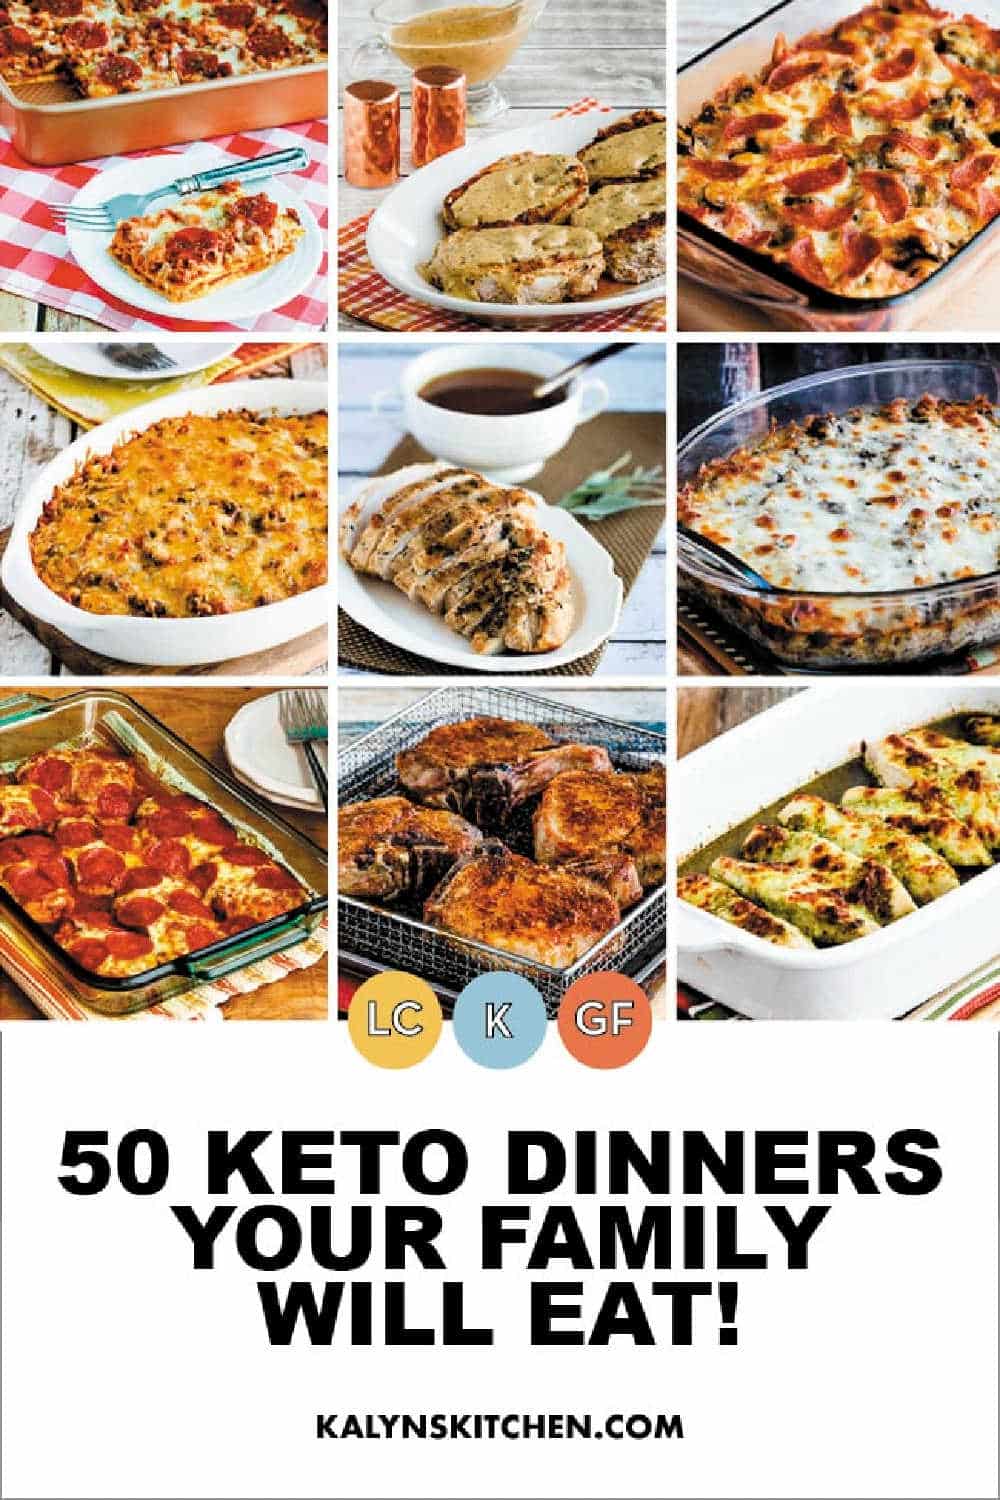 Pinterest image for 50 Keto Dinners Your Family Will Eat with collage showing featured recipes.